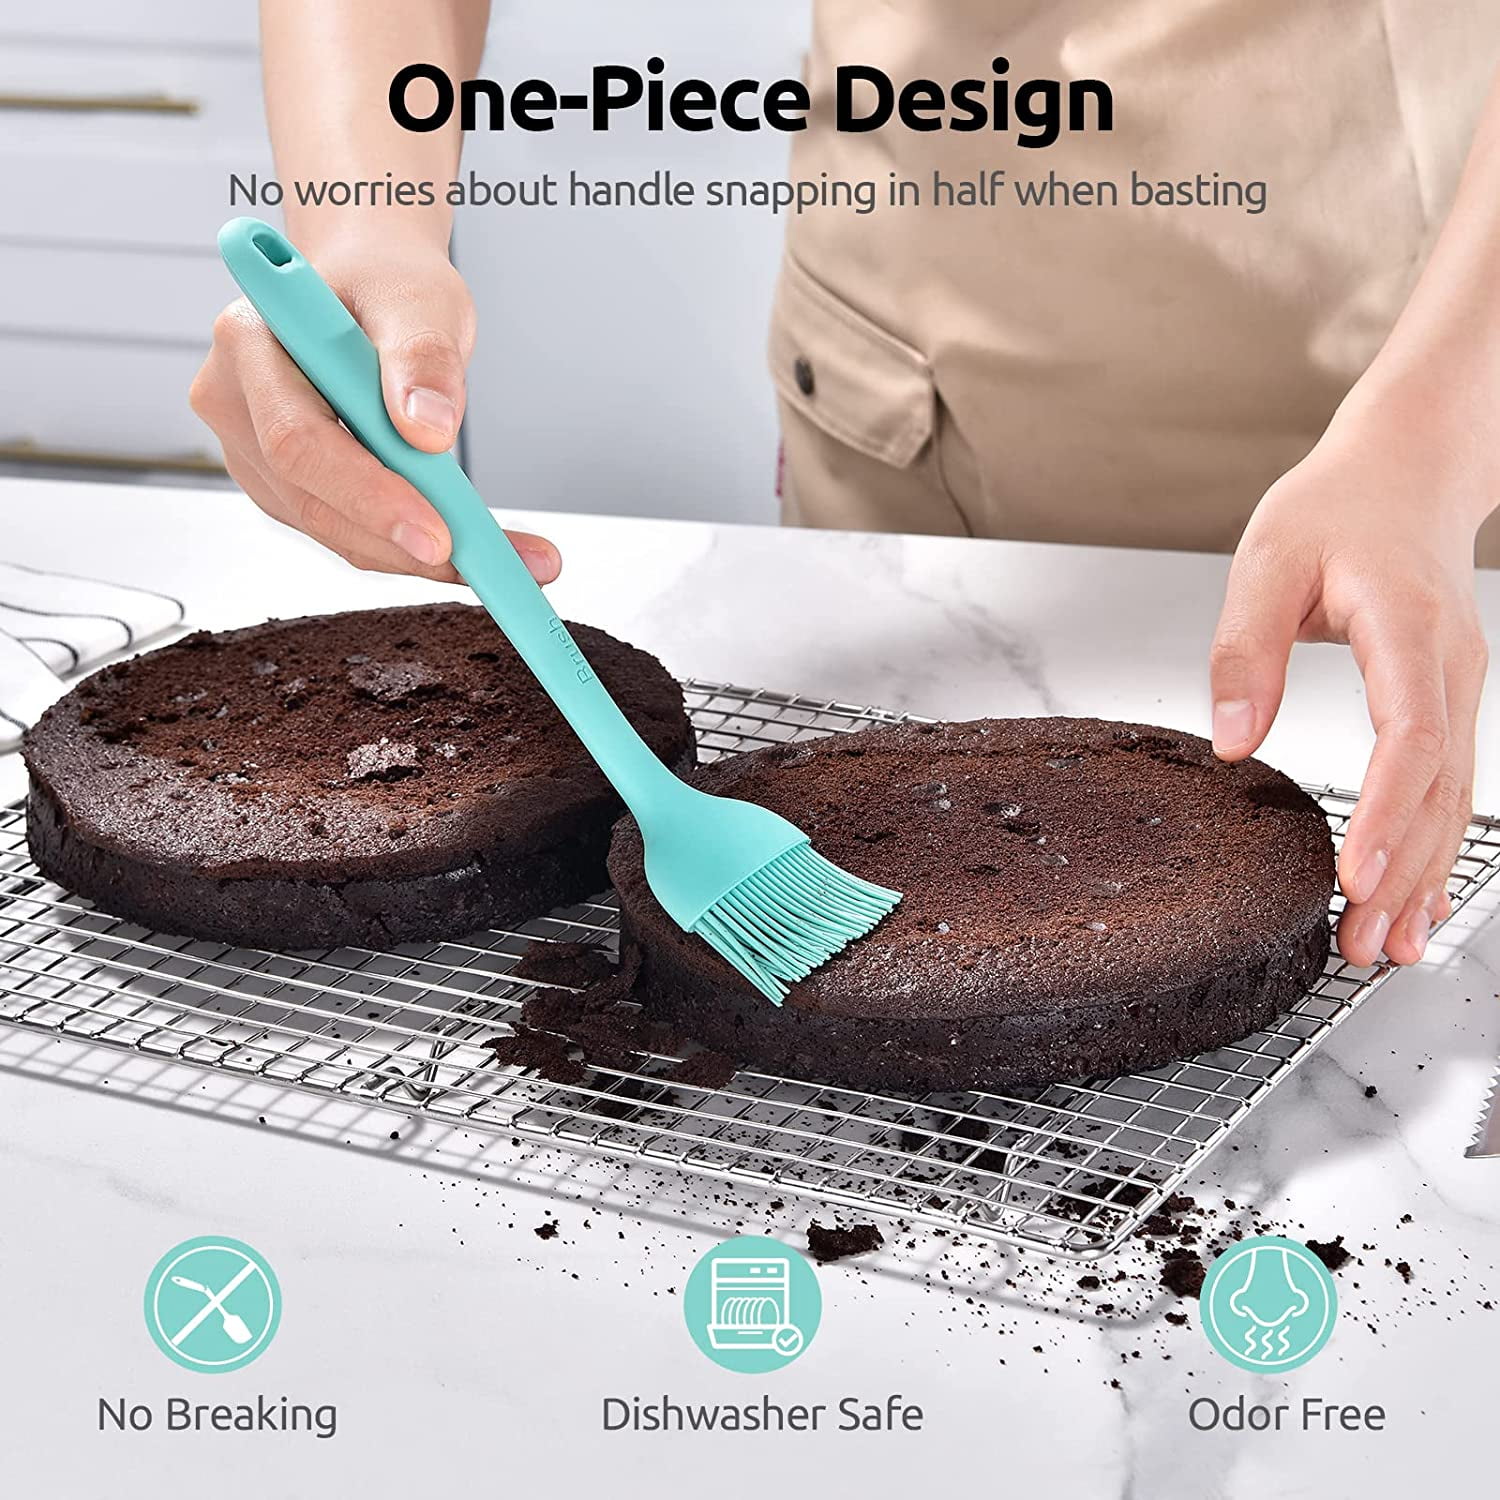 Angled Silicone Pastry Brush: U-Taste 600ºF Heat Resistant Kitchen Basting  Cooking Baking Food Rubber Head-Up Baster Brush for Oil Sauce BBQ Butter  Grill Meat Egg Bread (2 Small + 1 Large) 